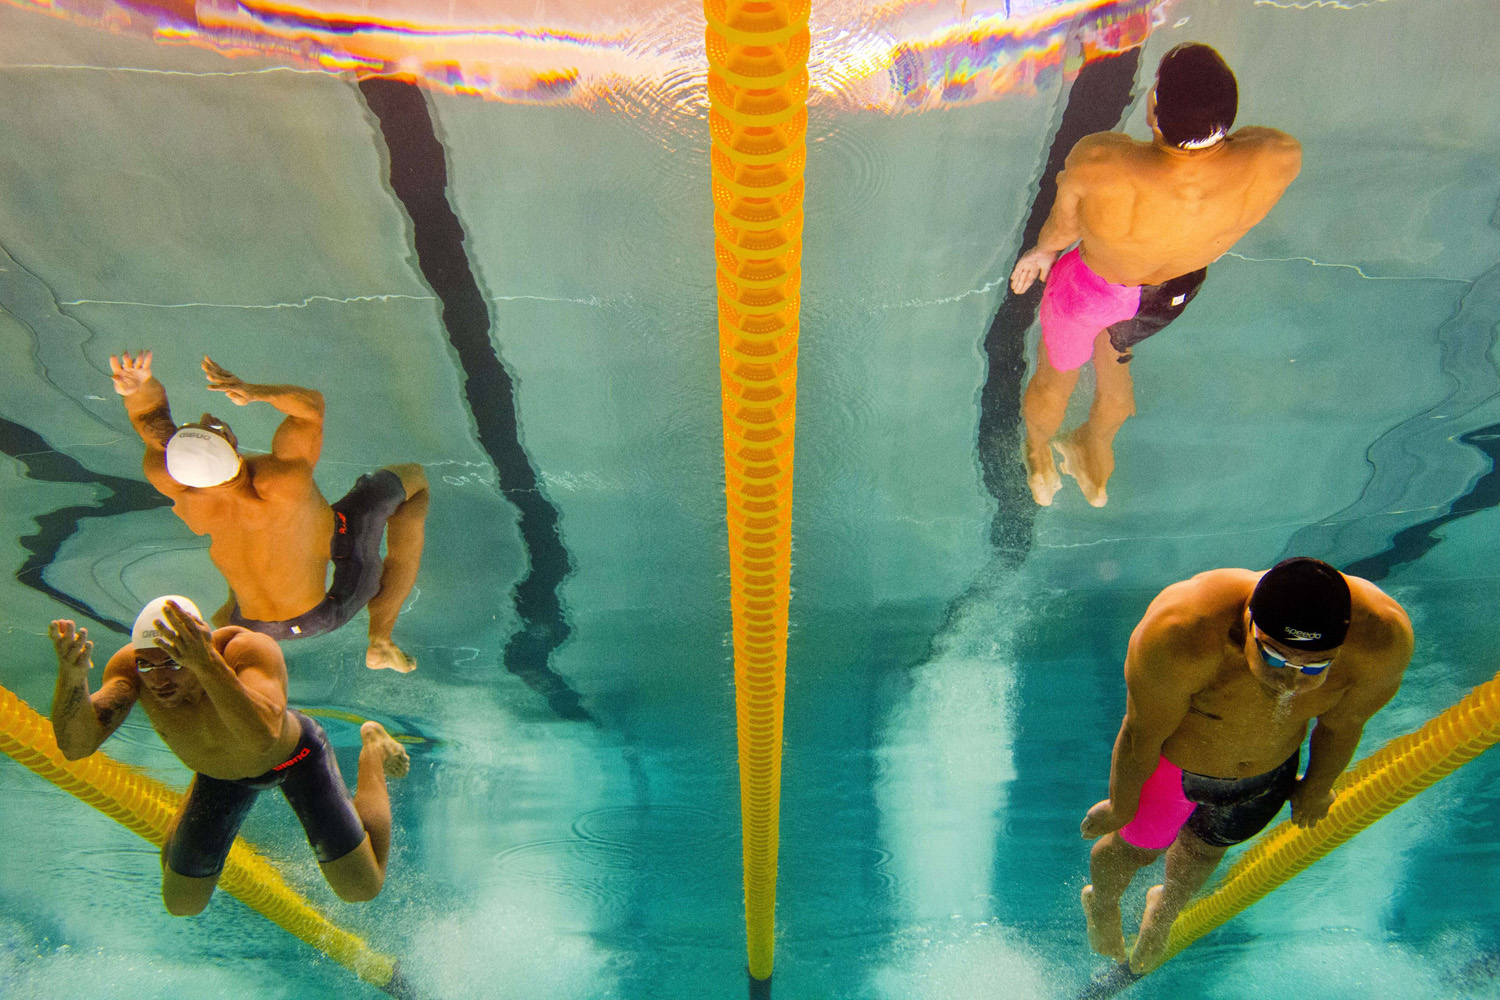 This picture taken with an underwater camera shows French swimmer Florent Manaudou (R) and silver medalist Giacomo Perez Dortona competing during the 50m breaststroke final on April 13, 2014.